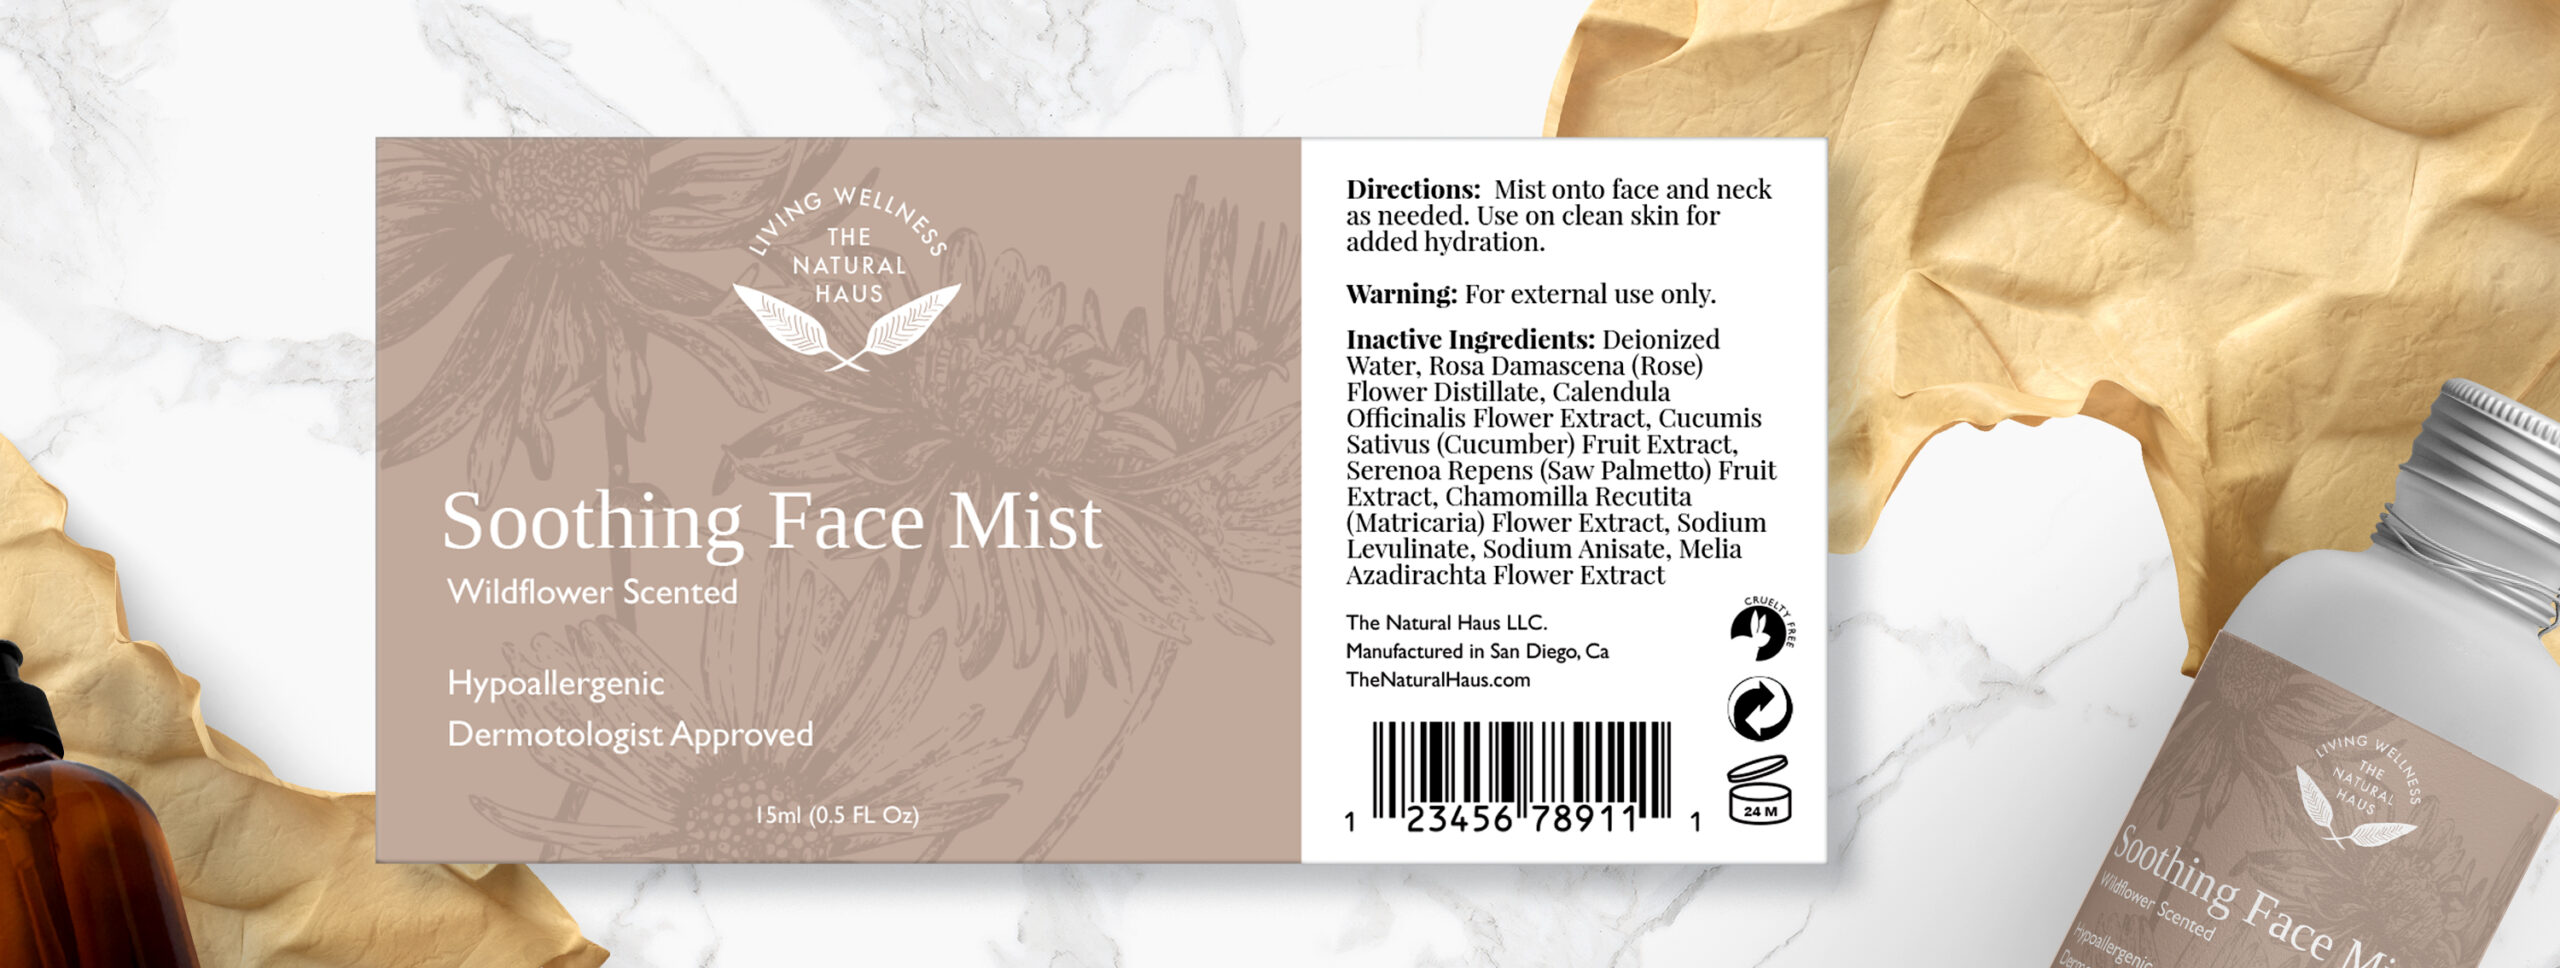 Are Your Cosmetic Labels Compliant? - Avery